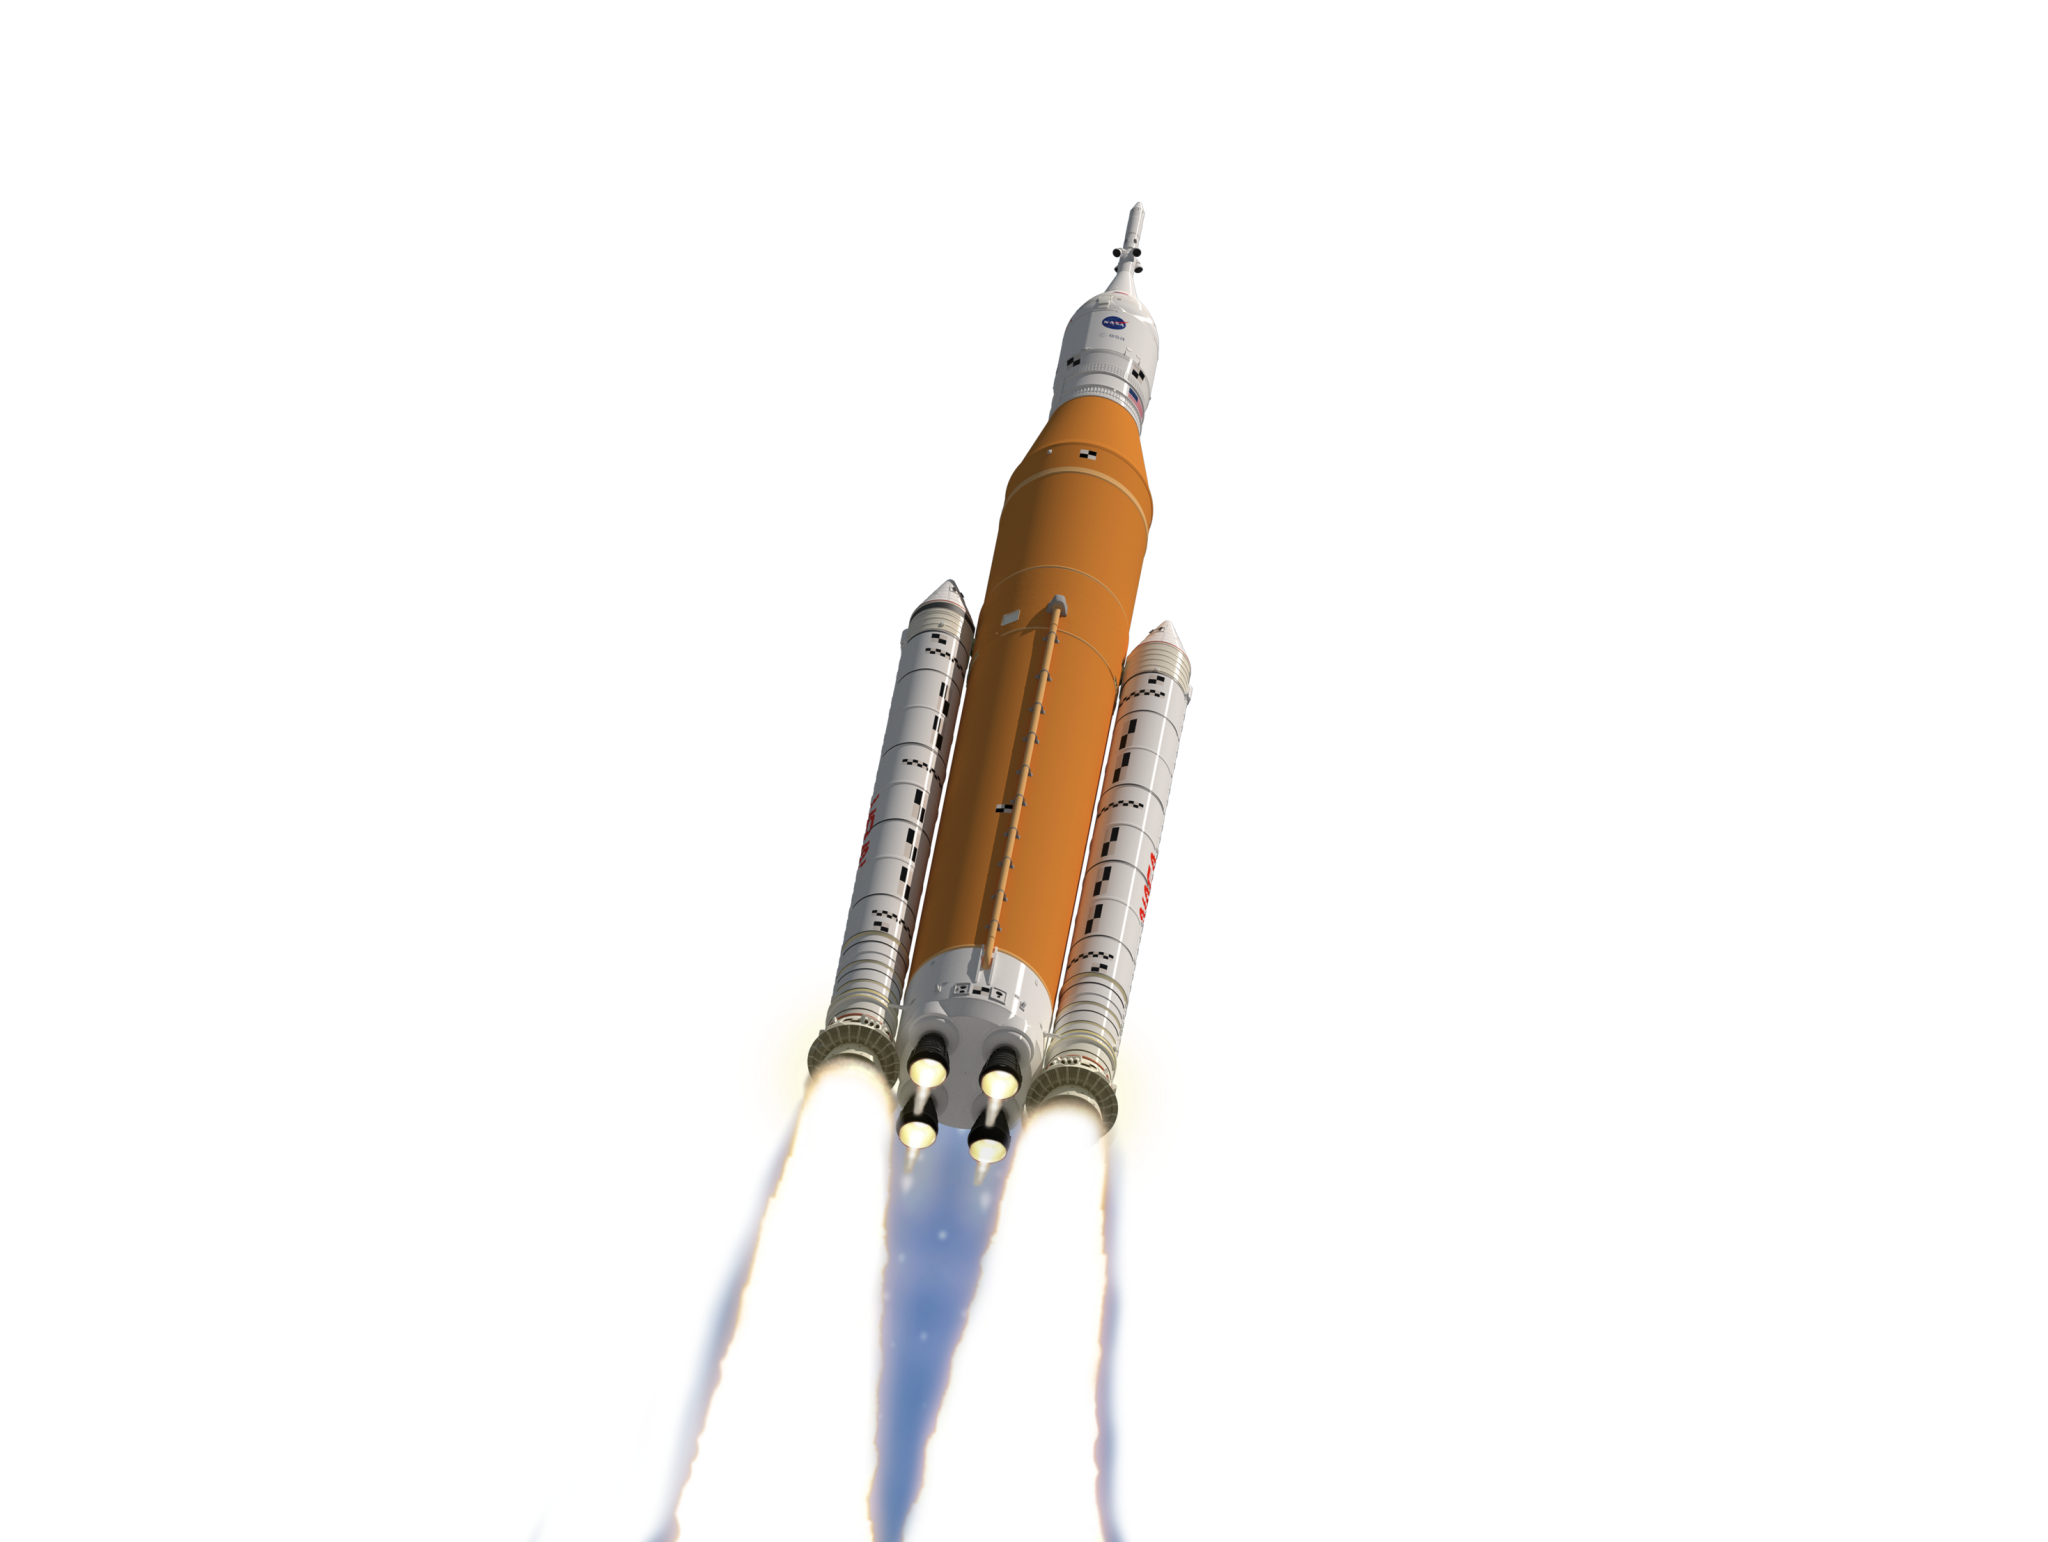 Model of Space Launch System during launch